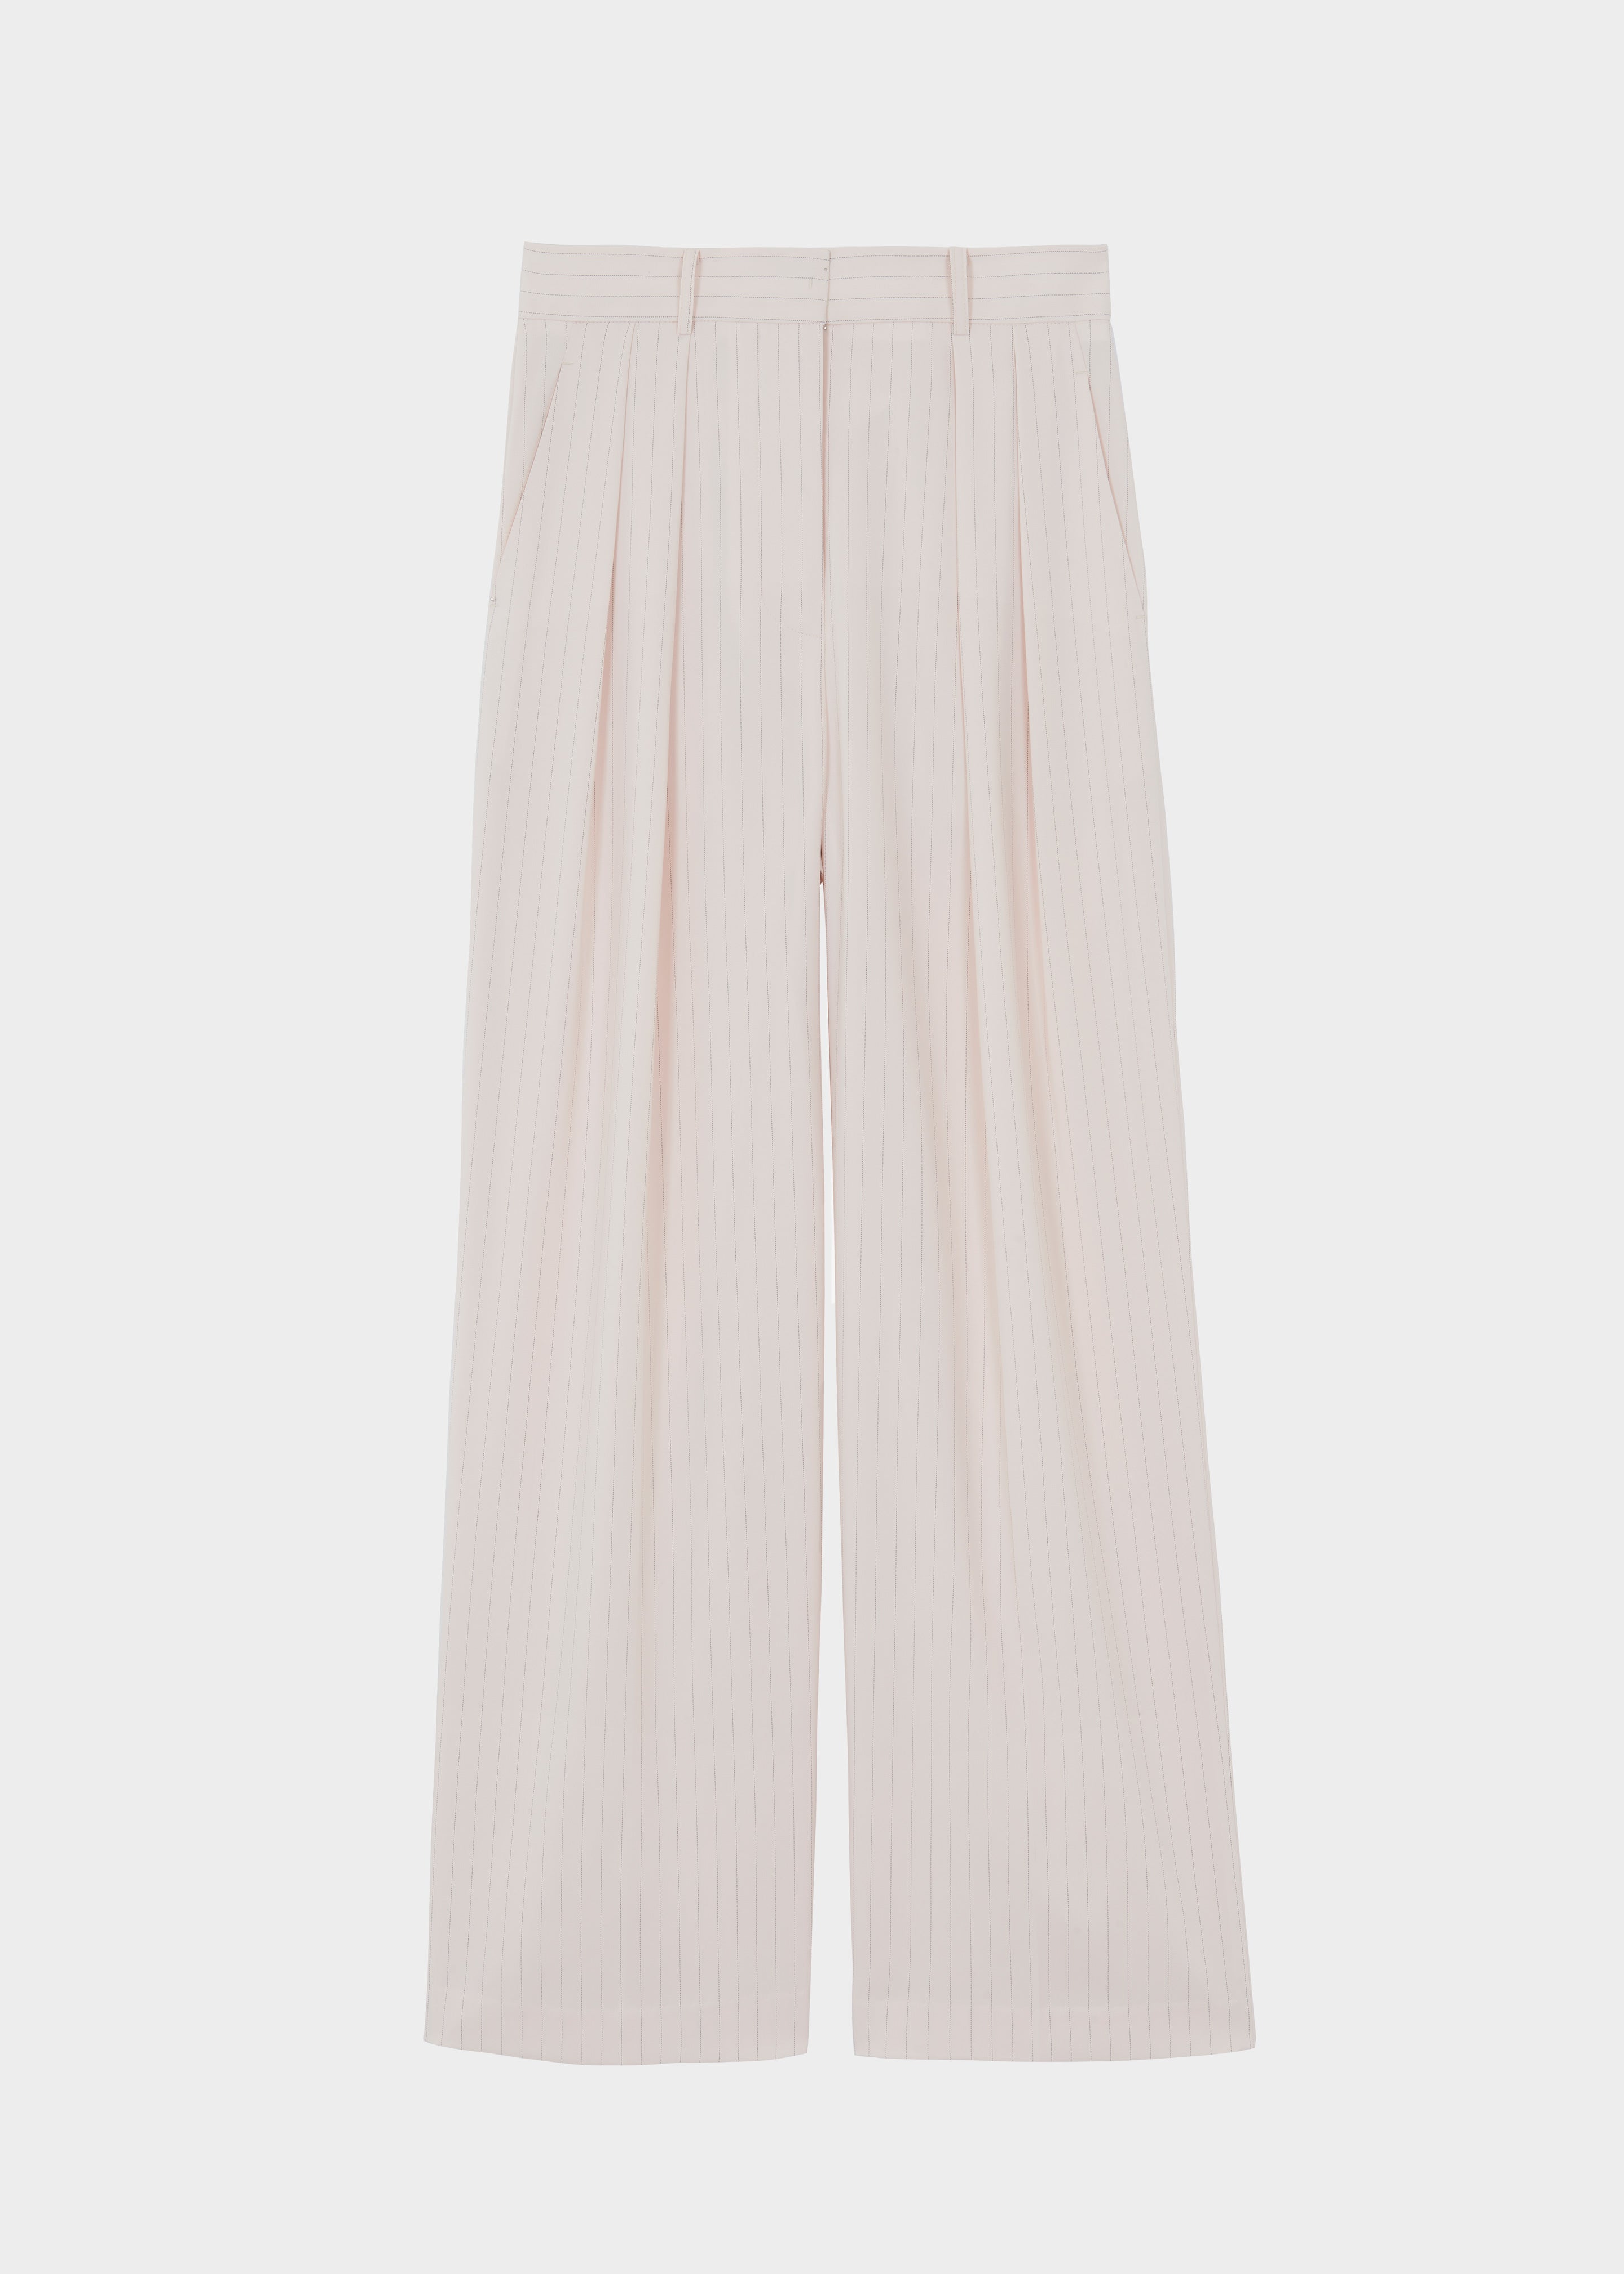 Tansy Fluid Pleated Trousers - Beige Pinstripe - 7